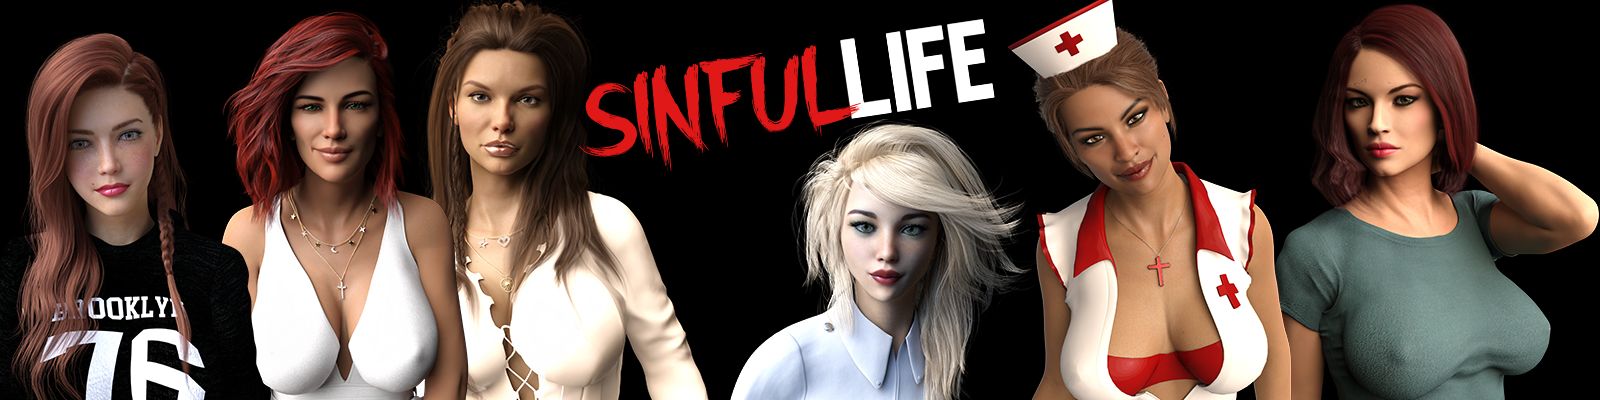 Sinful Life Apk Android Download